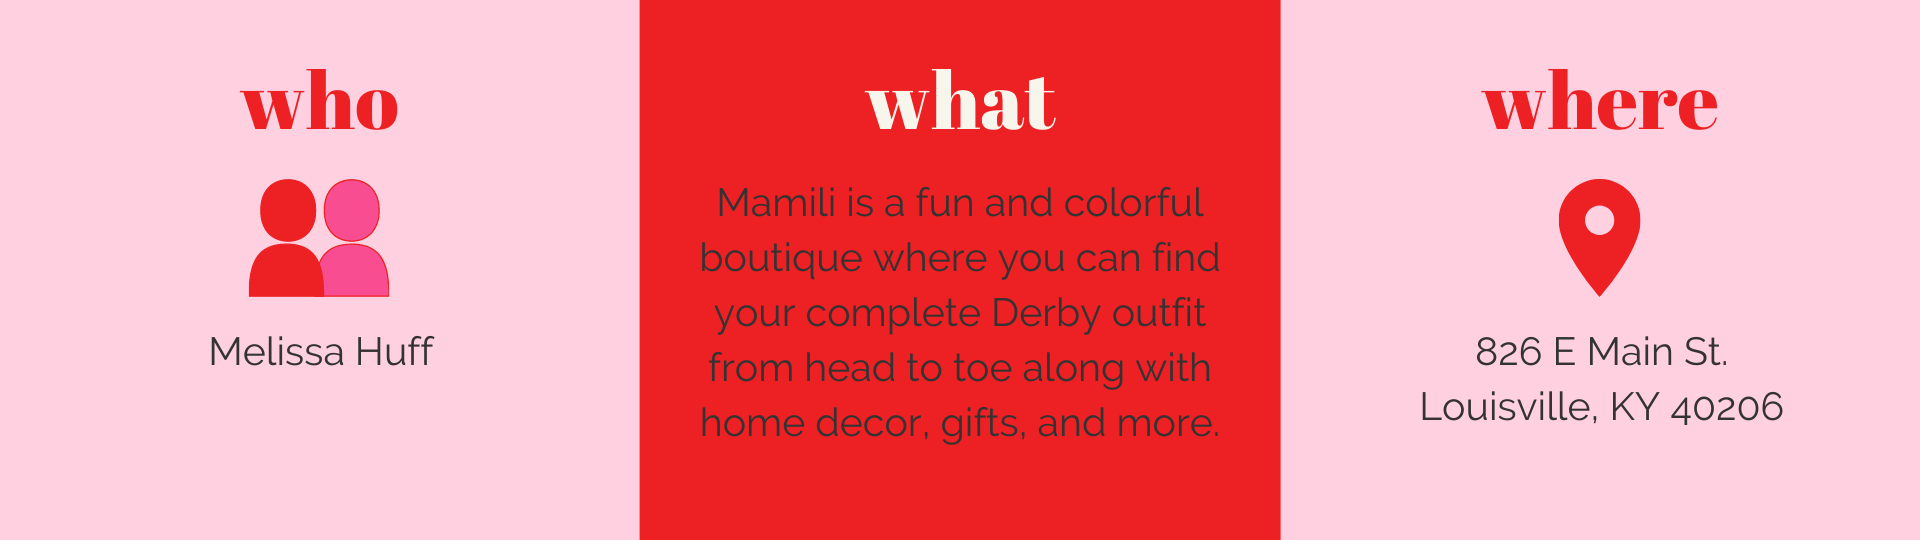 Mamili is one of the stops featured on the Nulu woman-owned walking tour, hosted by Woman-Owned Wallet